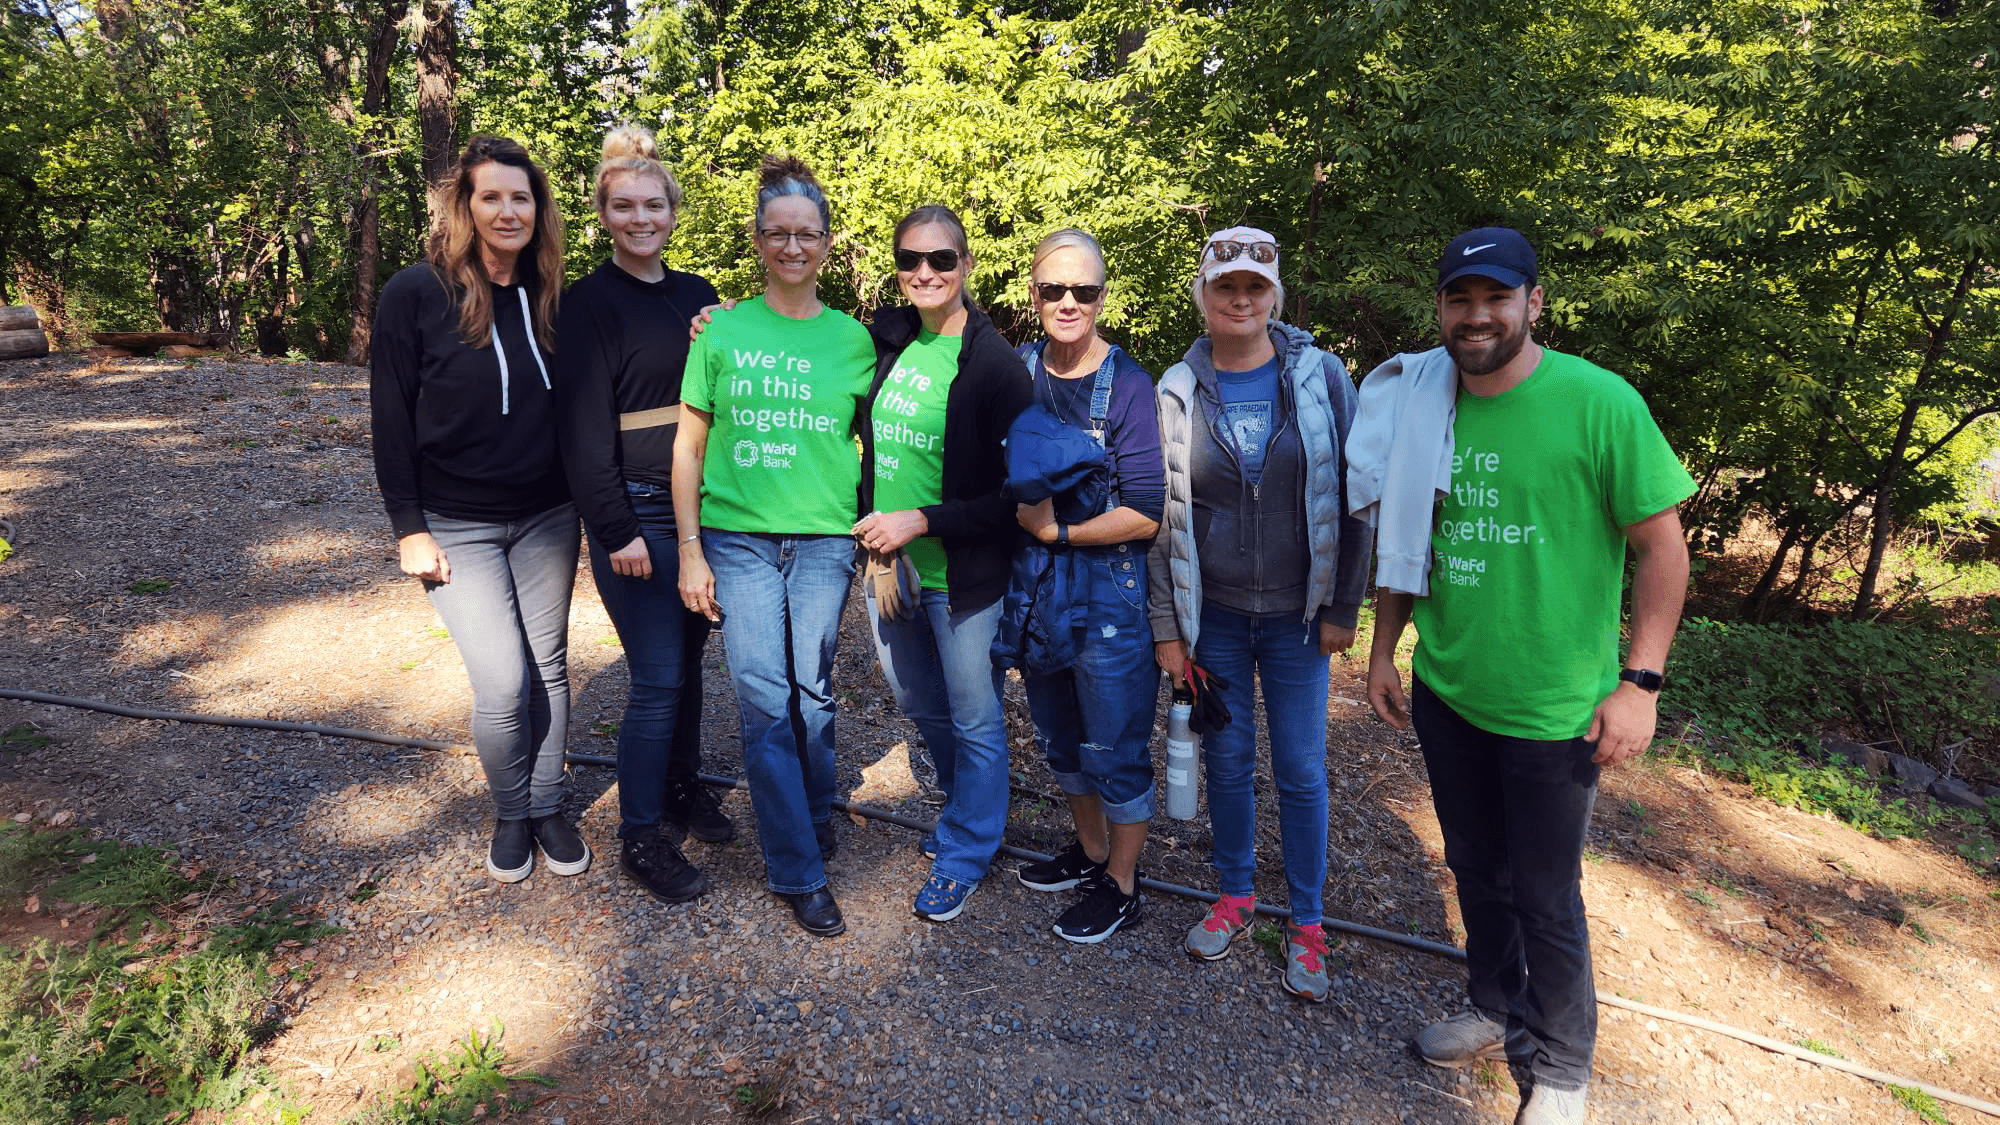 WaFd employees volunteering for United Way Day of Caring in Oregon